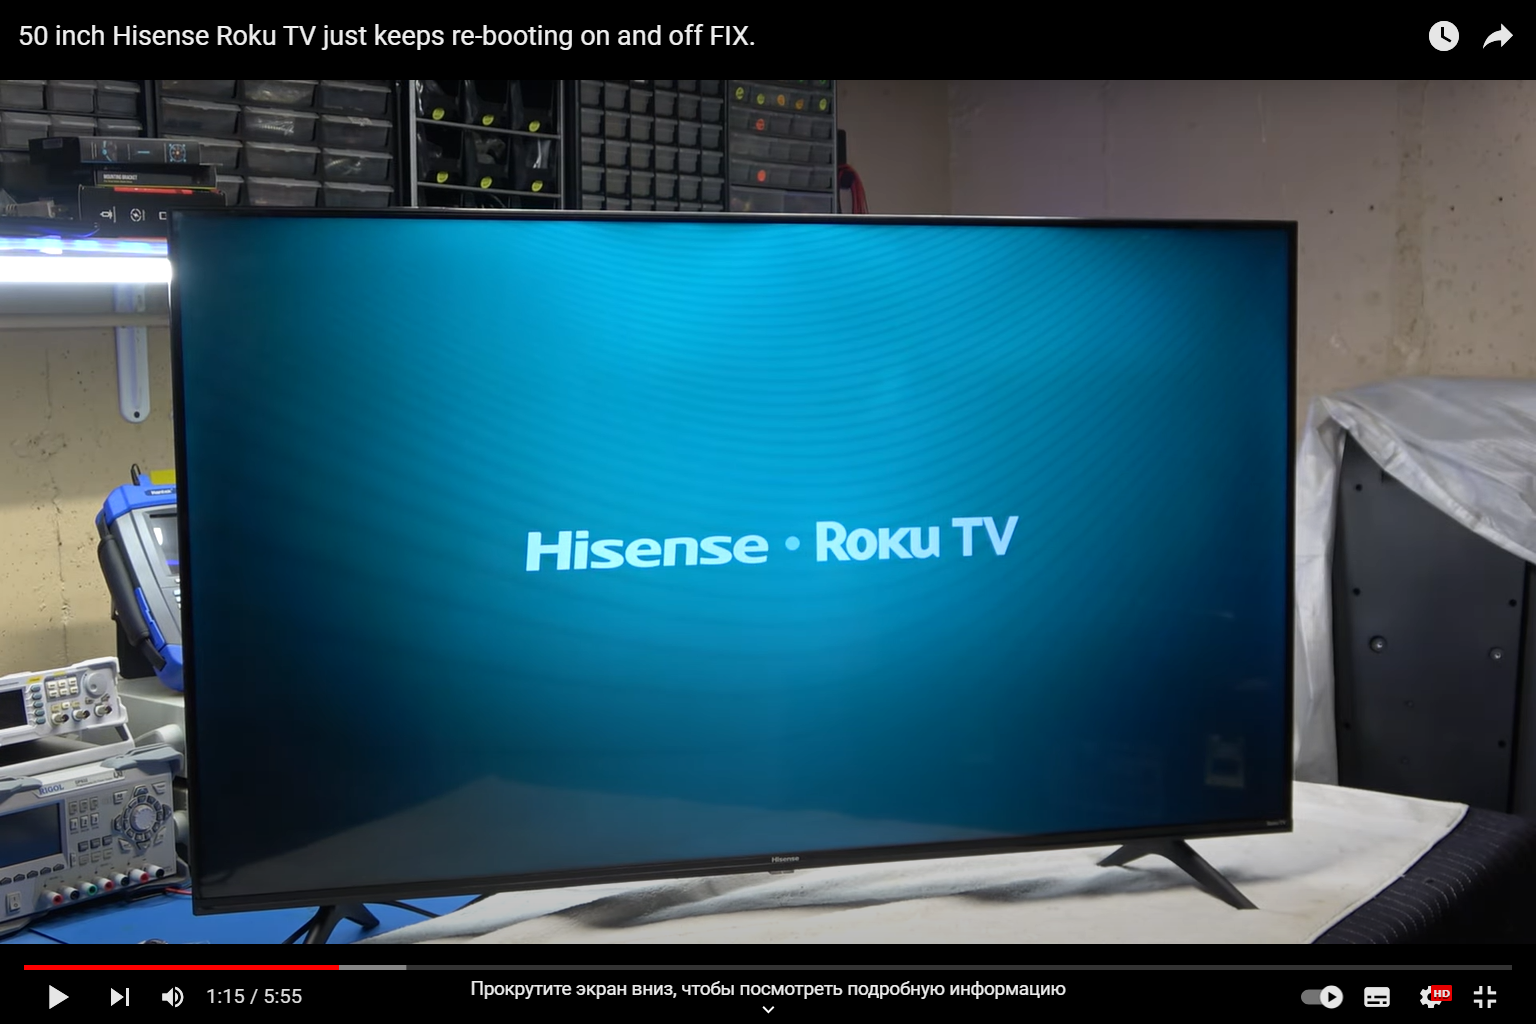 Hisense Roku TV Keeps Turning On & Off By Itself (DO THIS!)